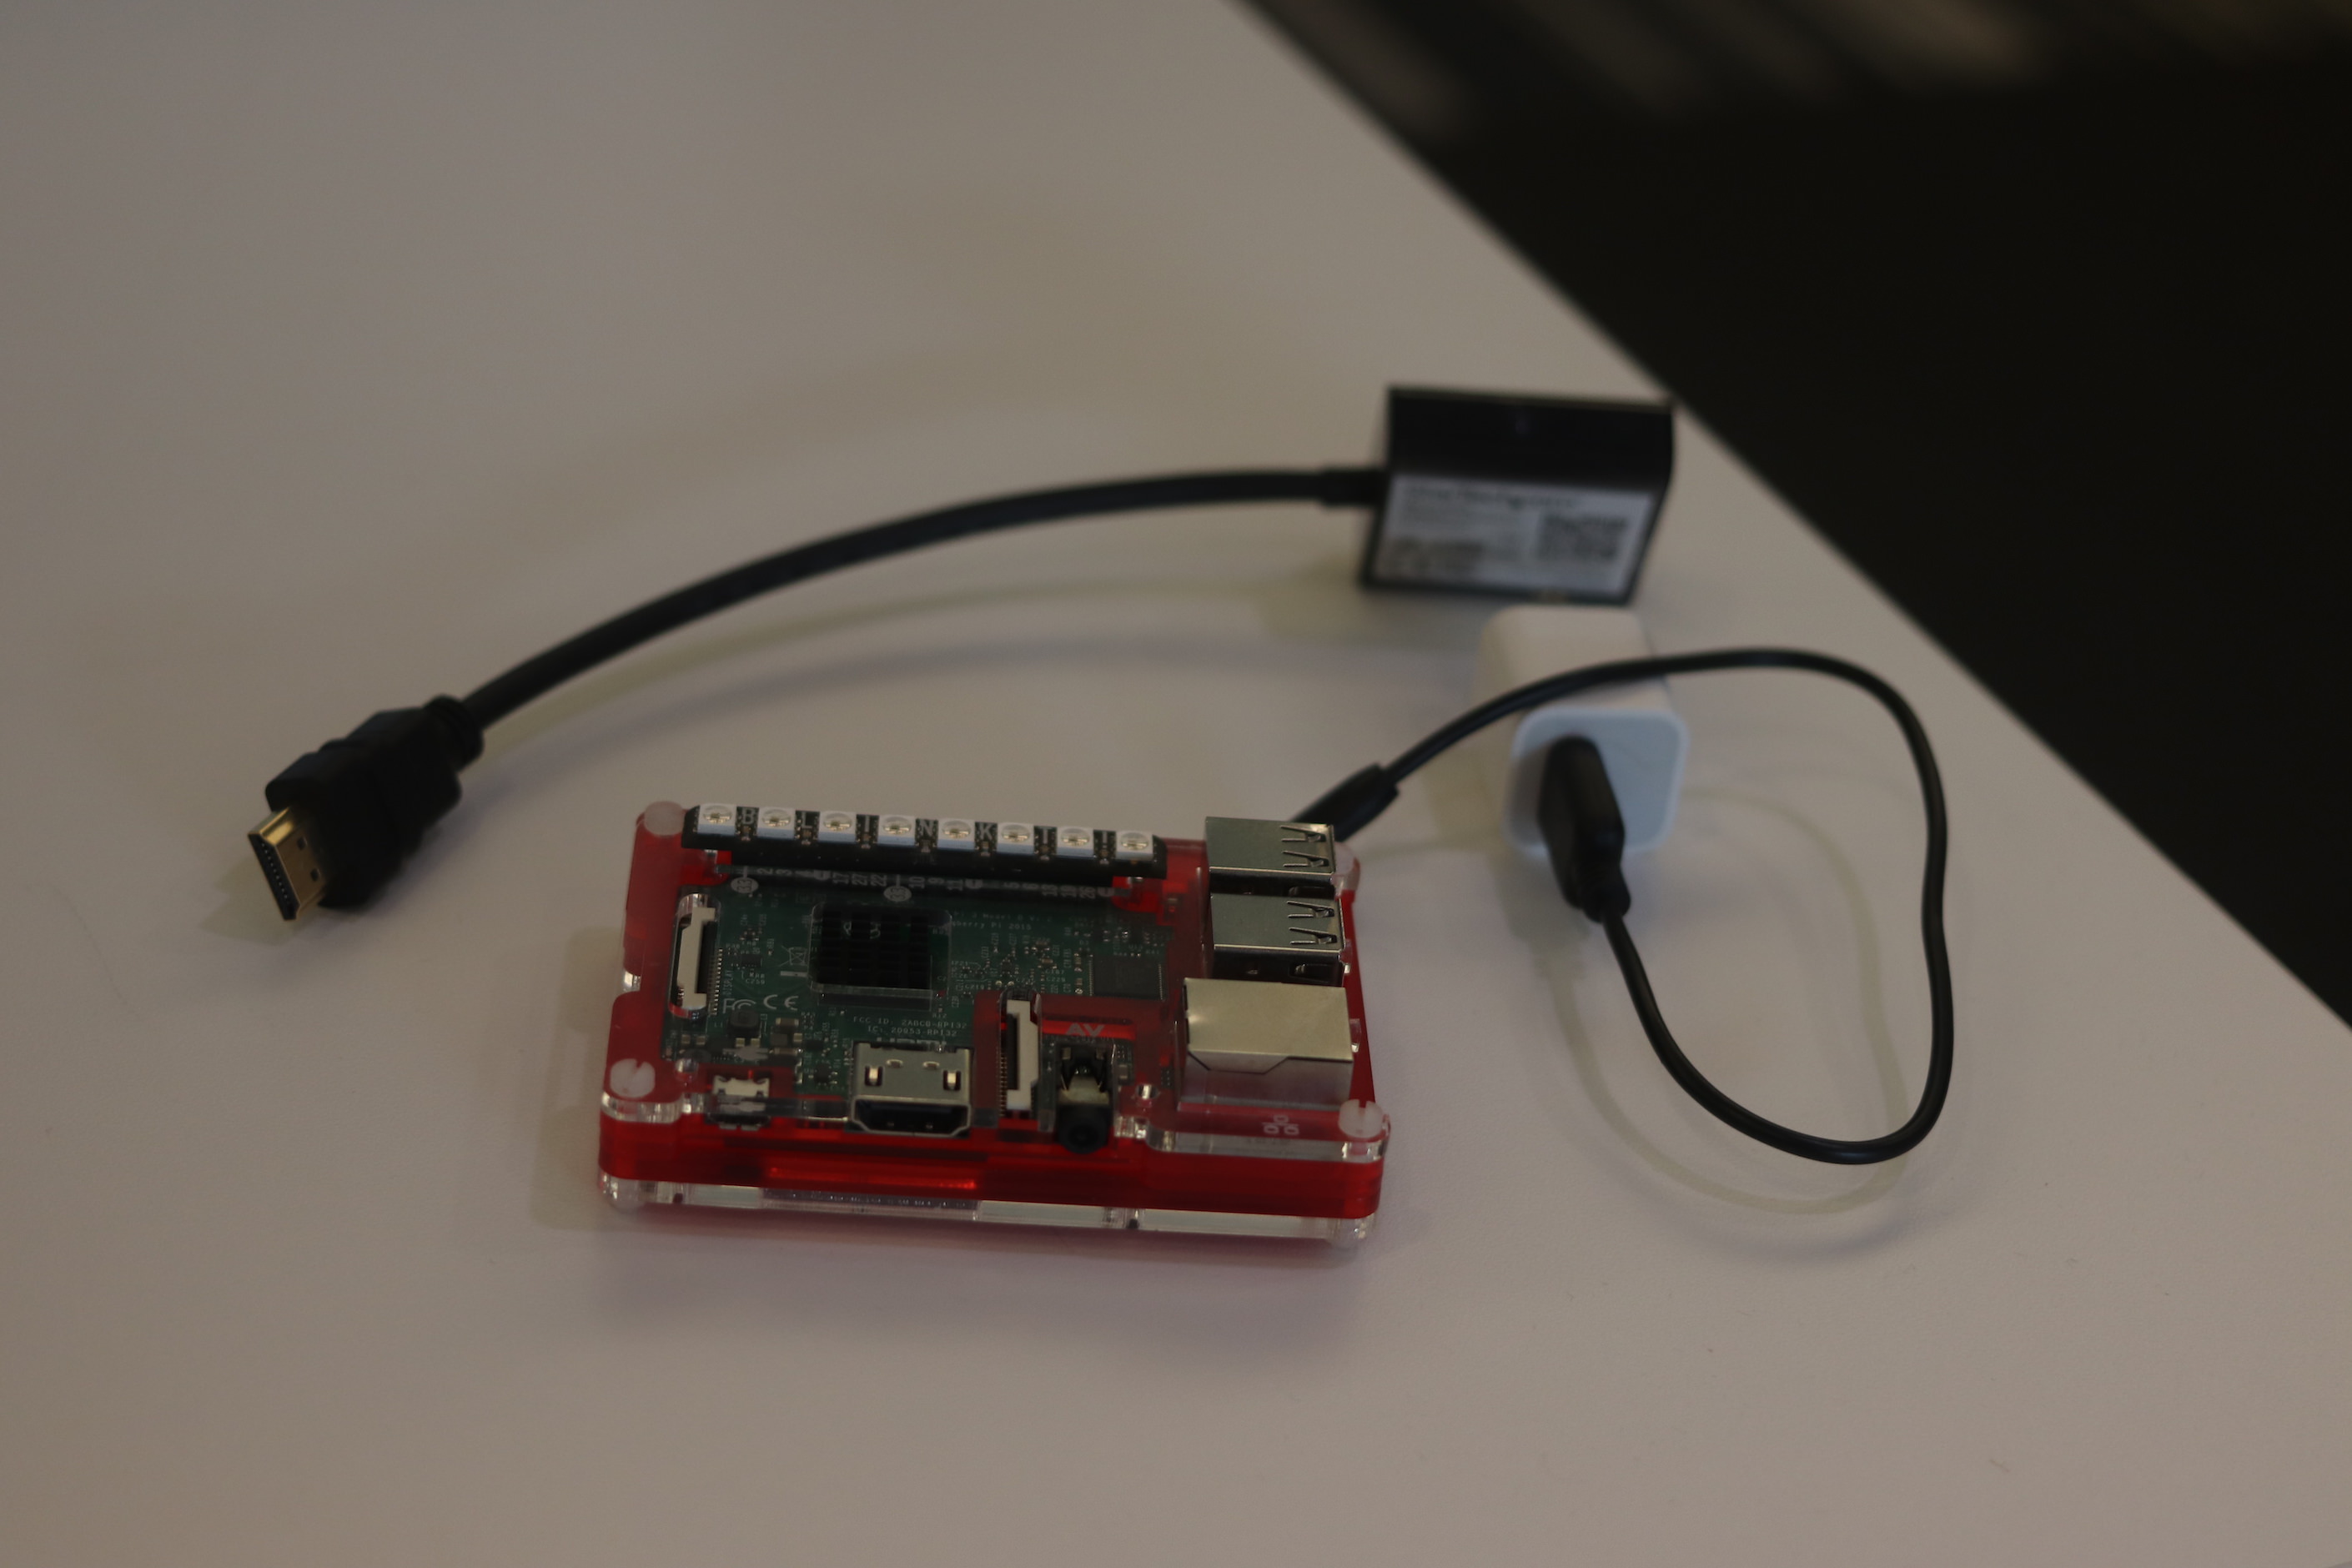 Raspberry Pi, USB power brick and cable, and an HDMI to VGA adapter.